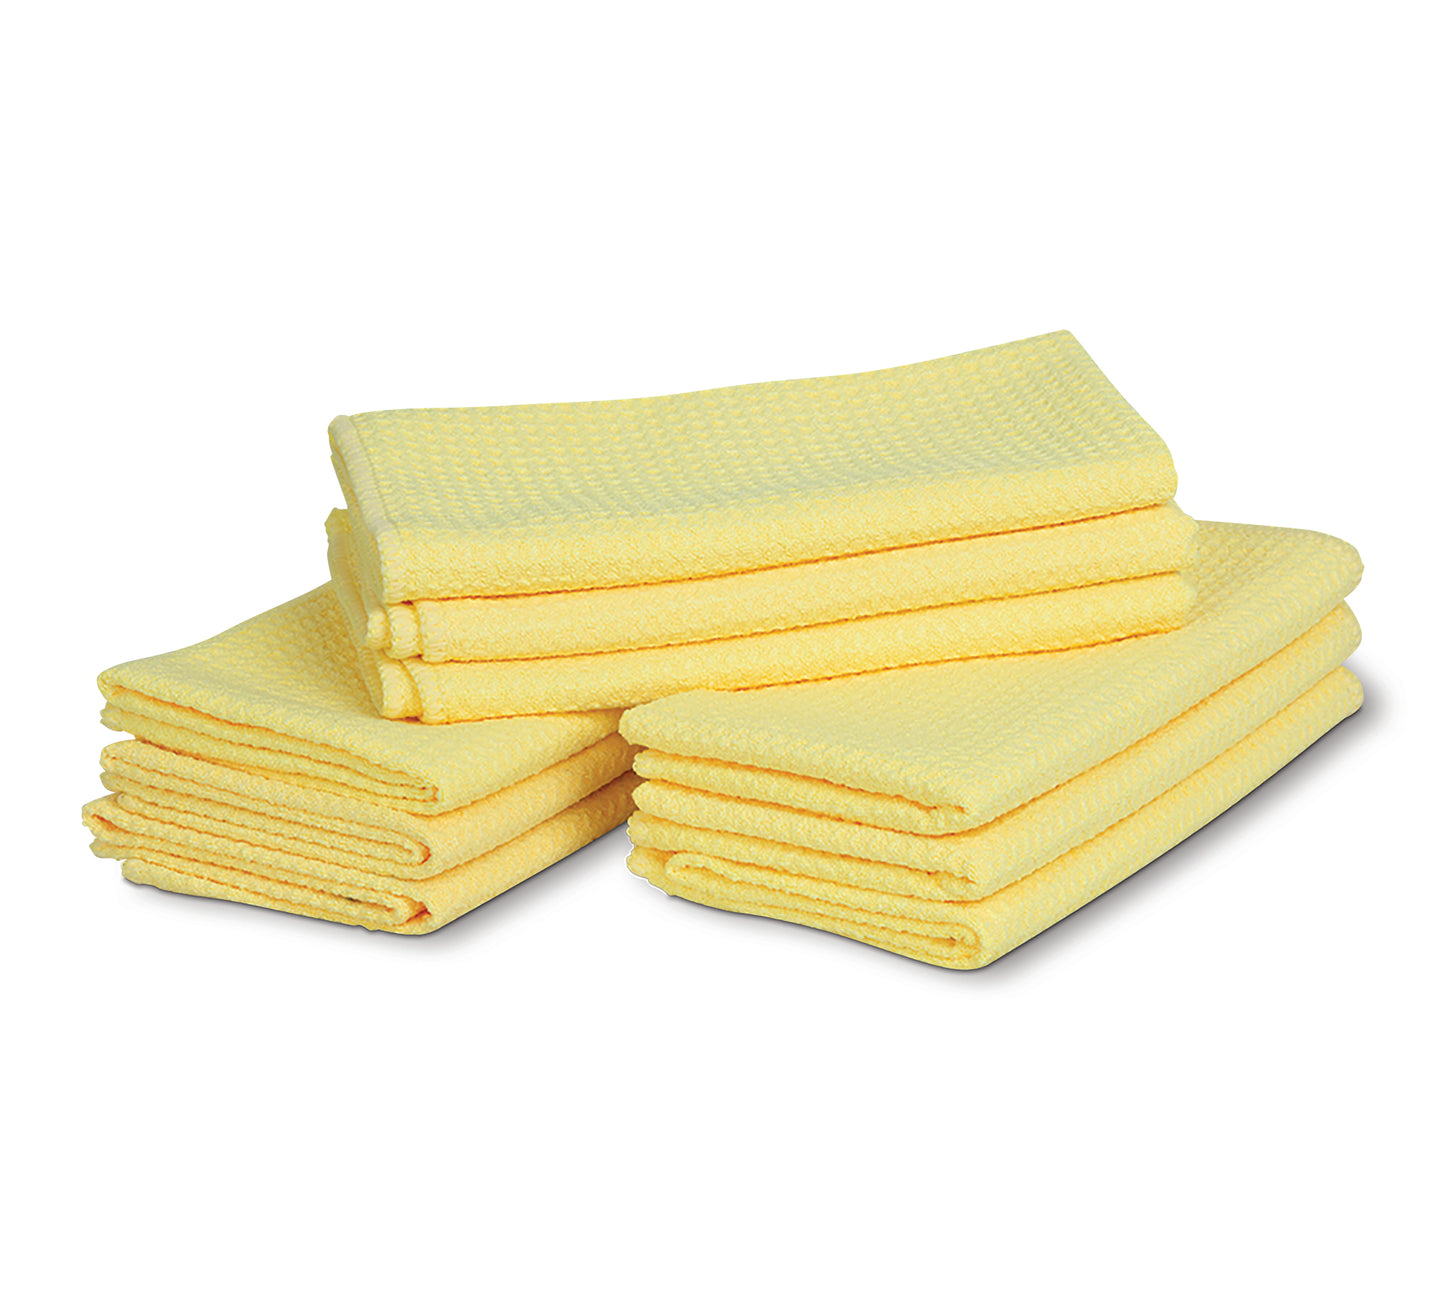 Microfiber Cleaning Cloths - 12 Pack Online